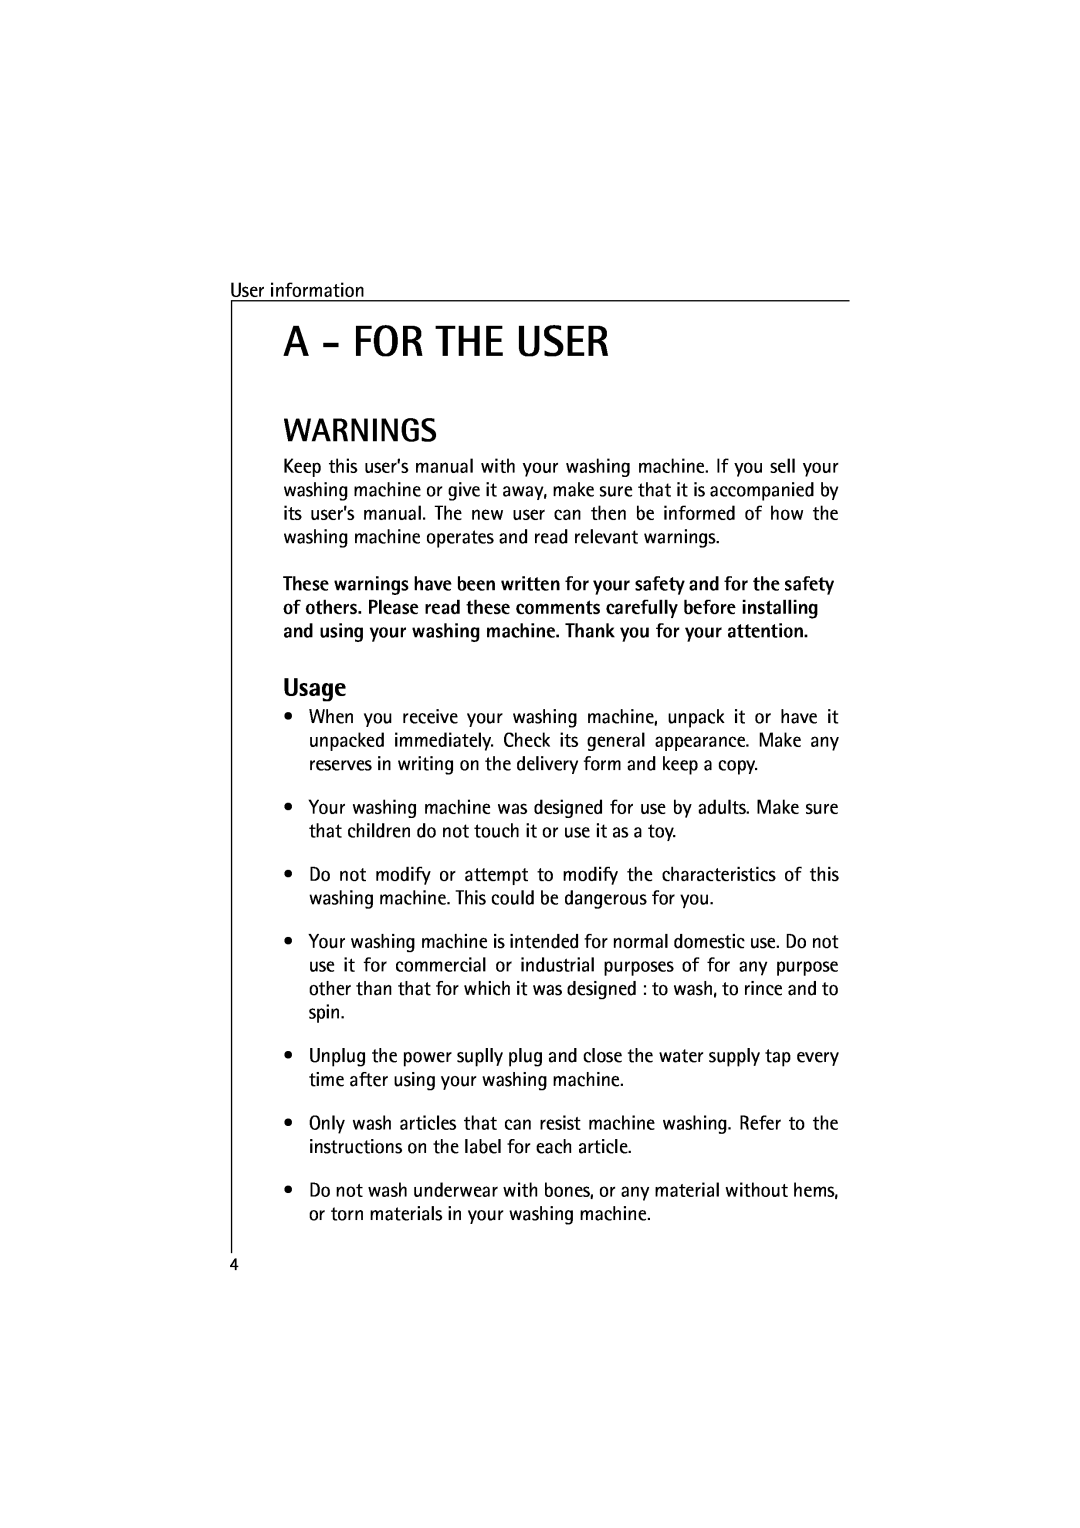 AEG 48380 manual A - For The User, Warnings, Usage 